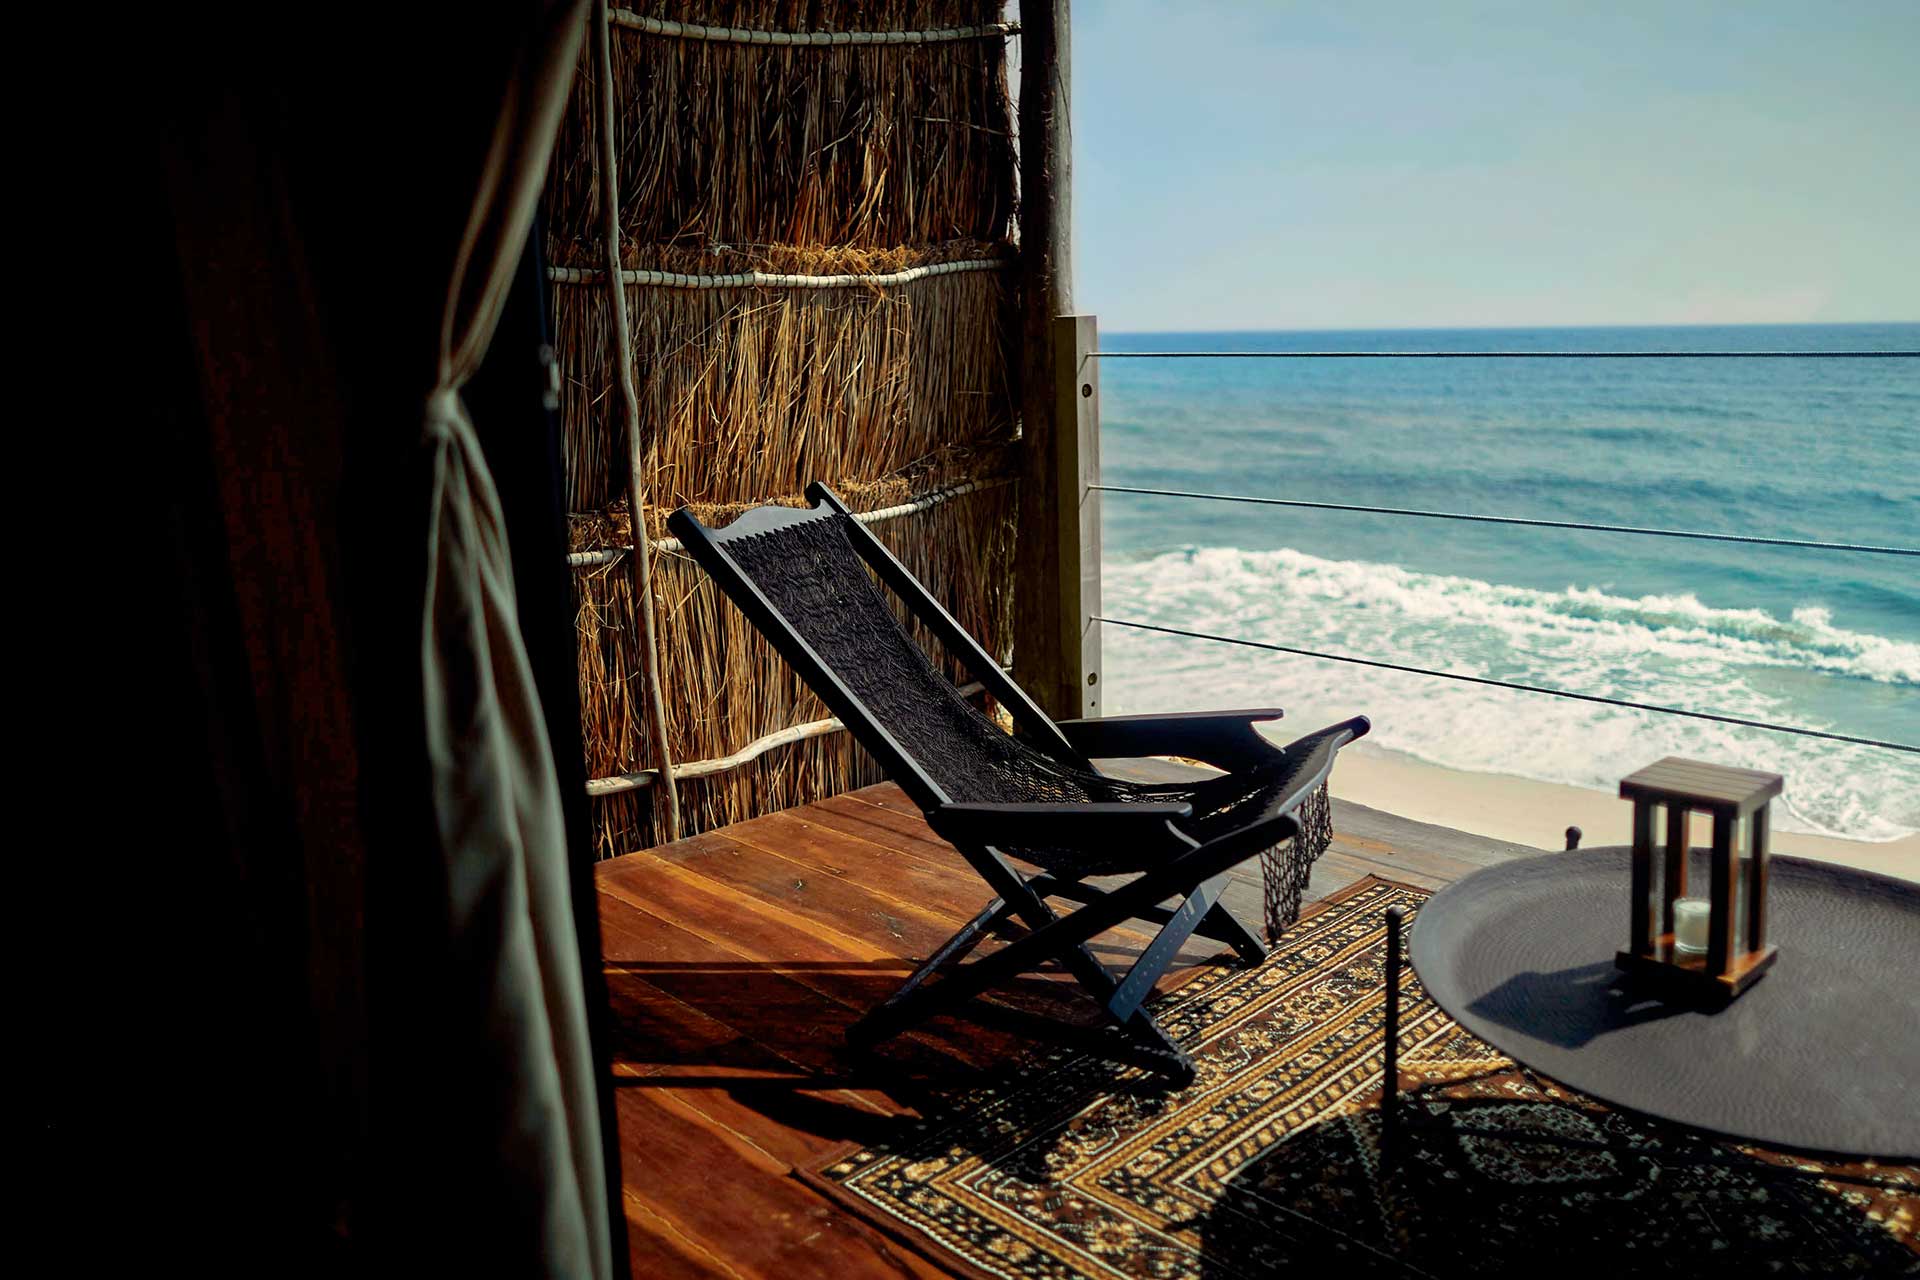 Lampoon, Habitas Tulum, details, chair in front of the sea